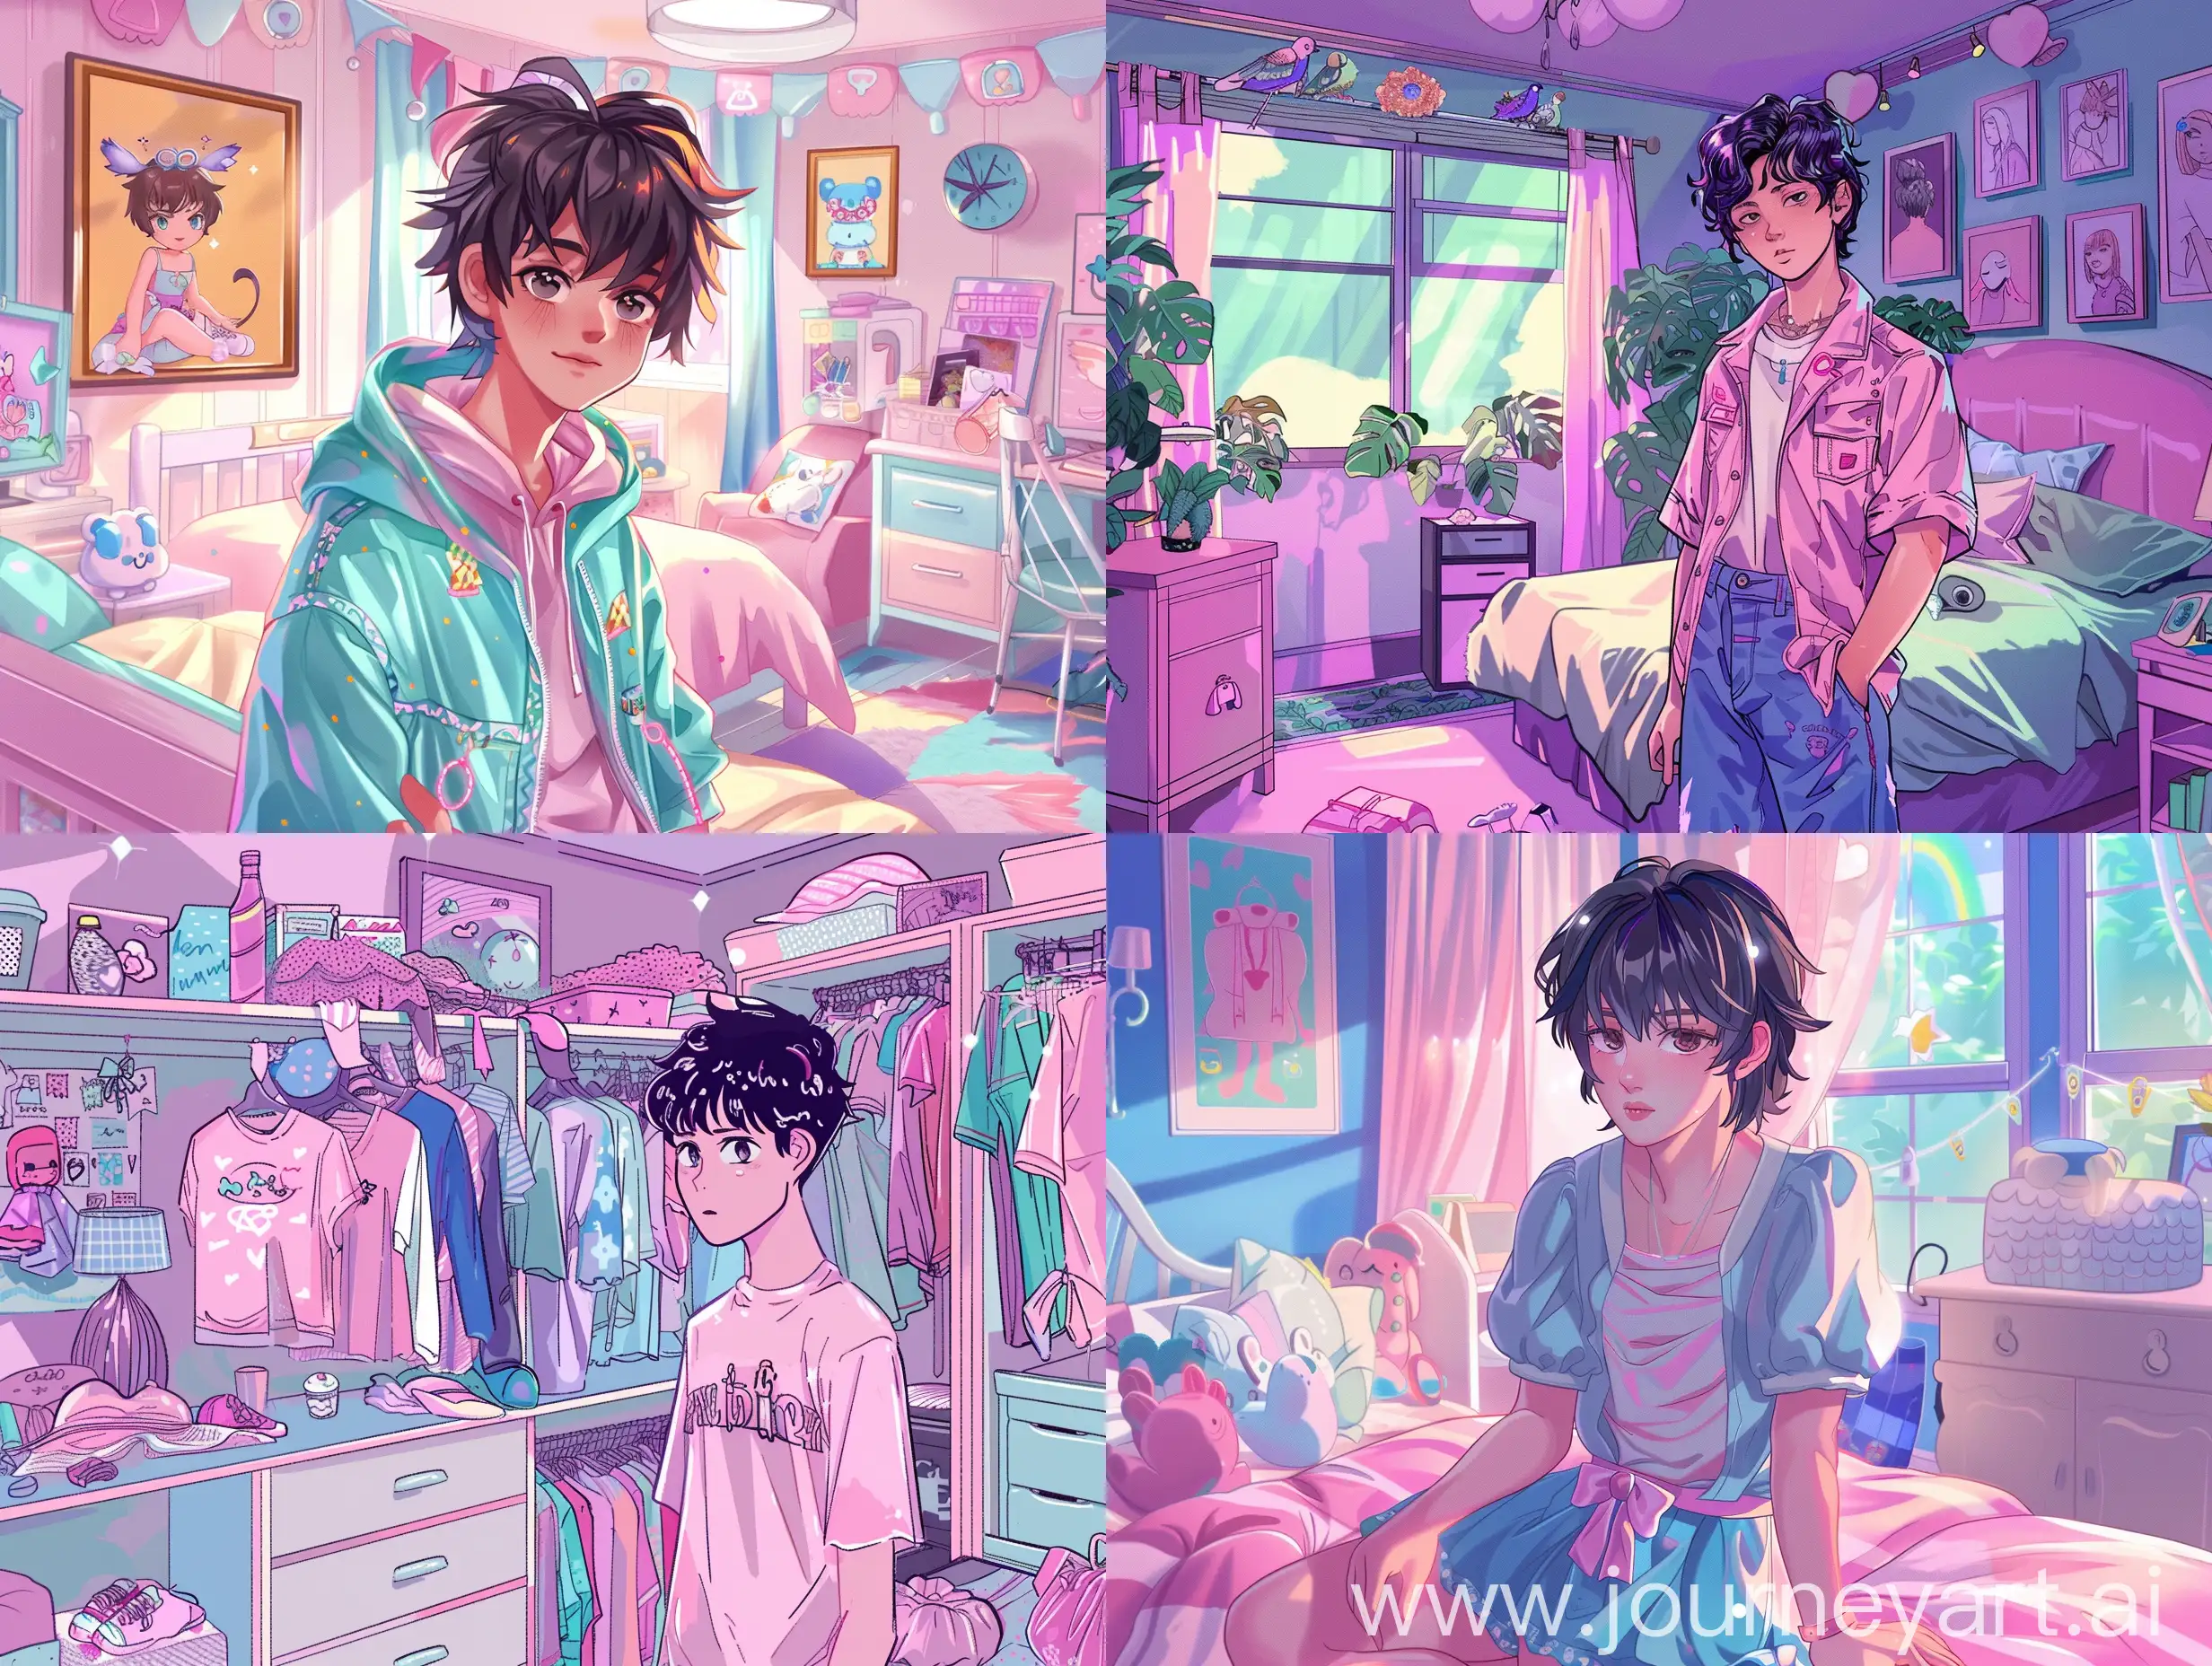 Adorable-Anime-Boy-in-Girly-Attire-Surrounded-by-Girly-Room-Decor